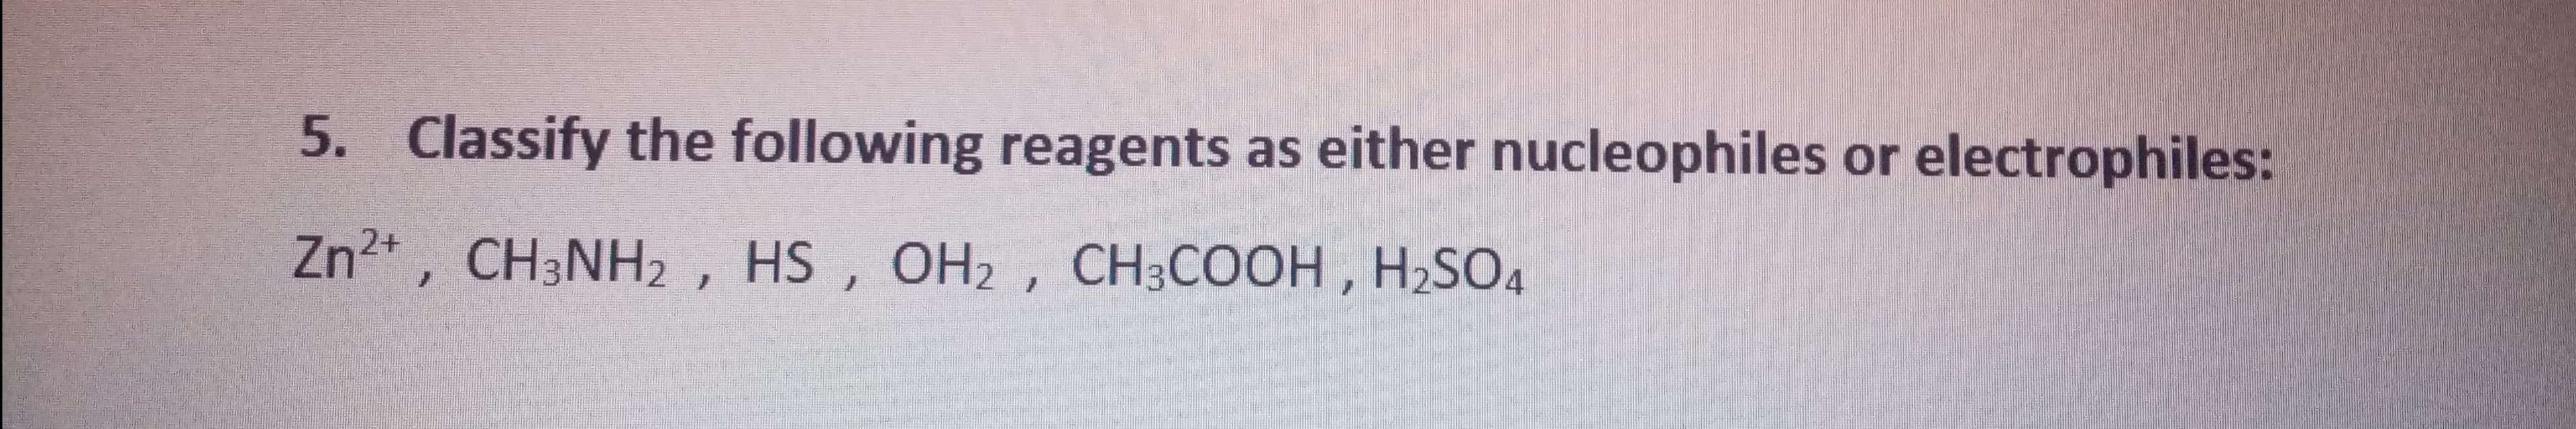 5. Classify the following reagents as either nucleophiles or electrophiles:
Zn2* , CH3NH2 , HS , OH2 , CH3COOH, H2SO4
